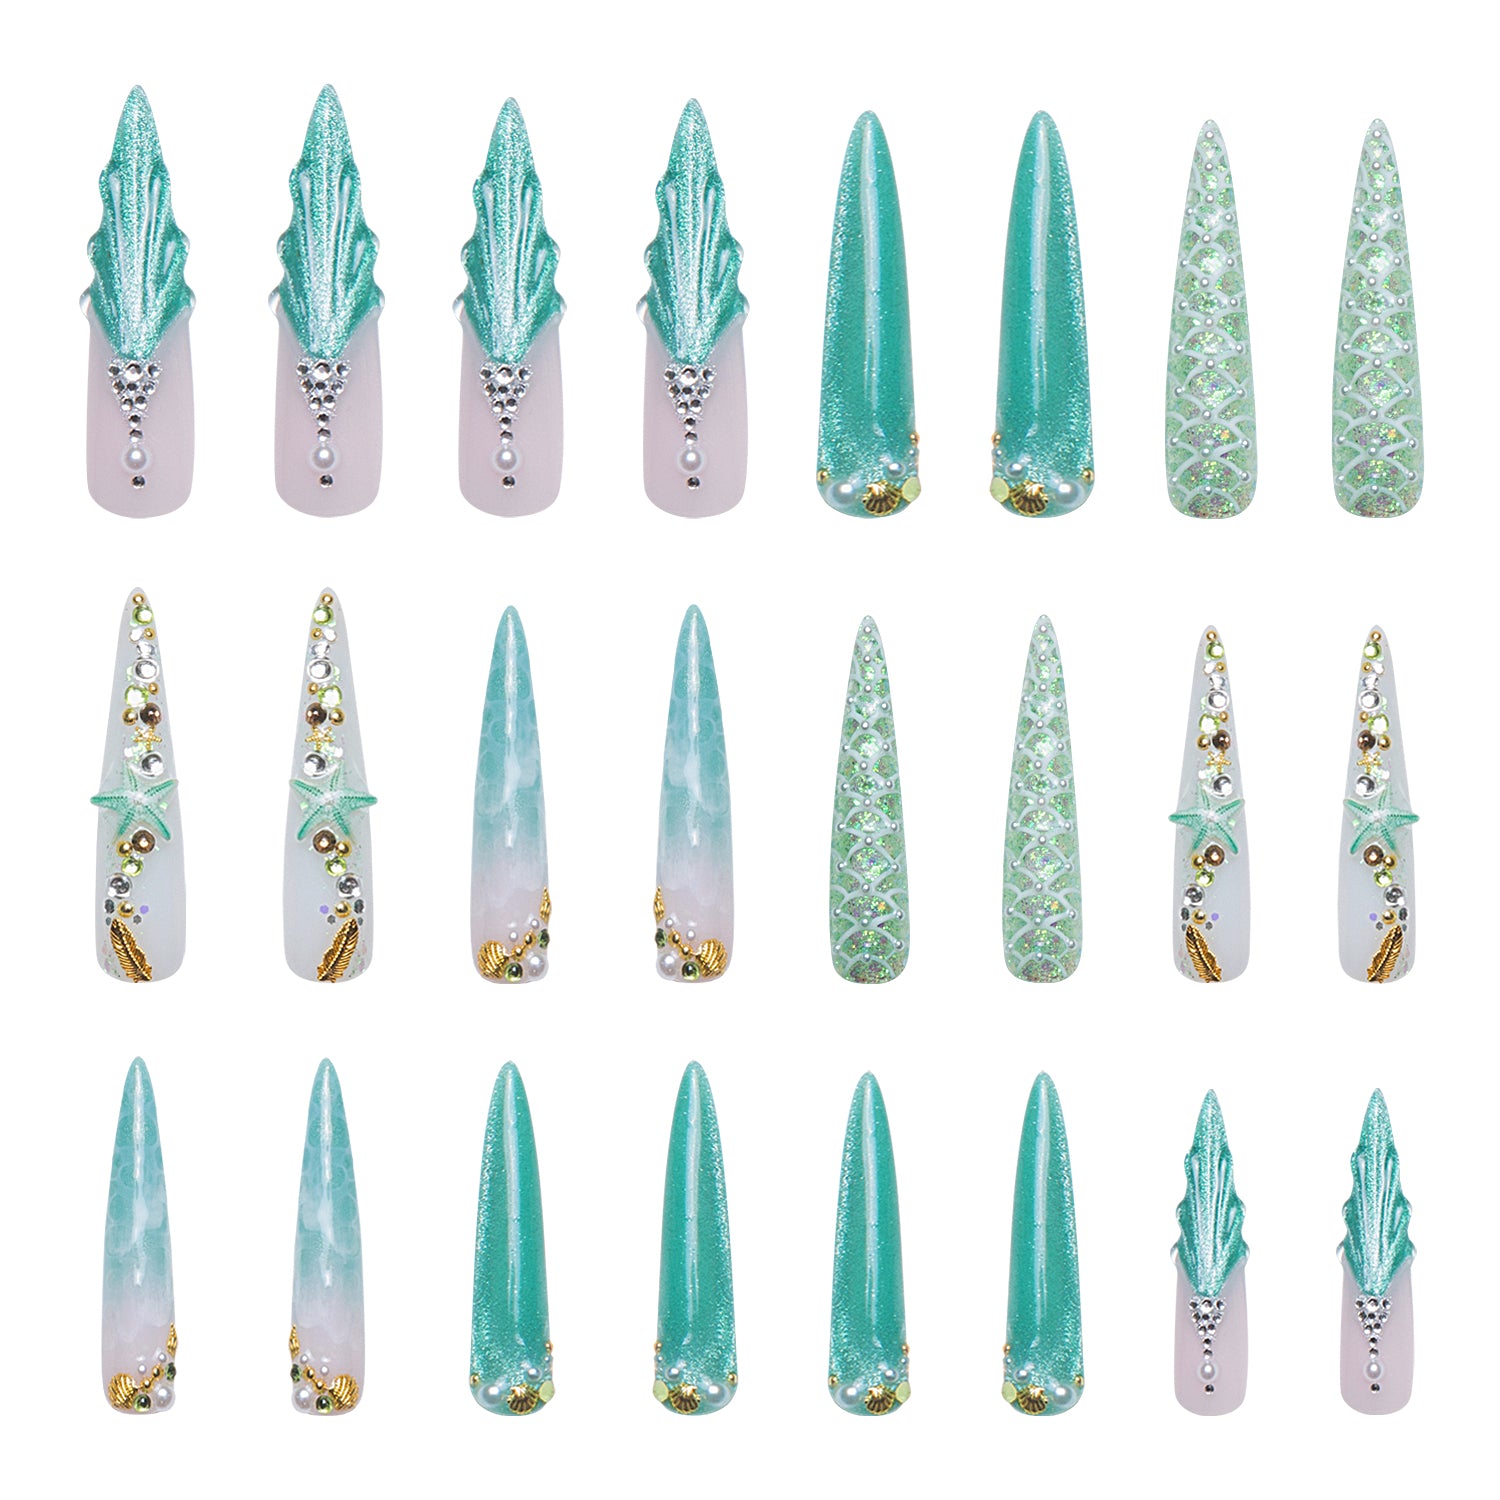 24 pieces of Surfing Girls press-on nails with Hawaii sea blue base. Designs include starfish, glitters, and intricate beach-themed patterns. Available at Lovful.com.